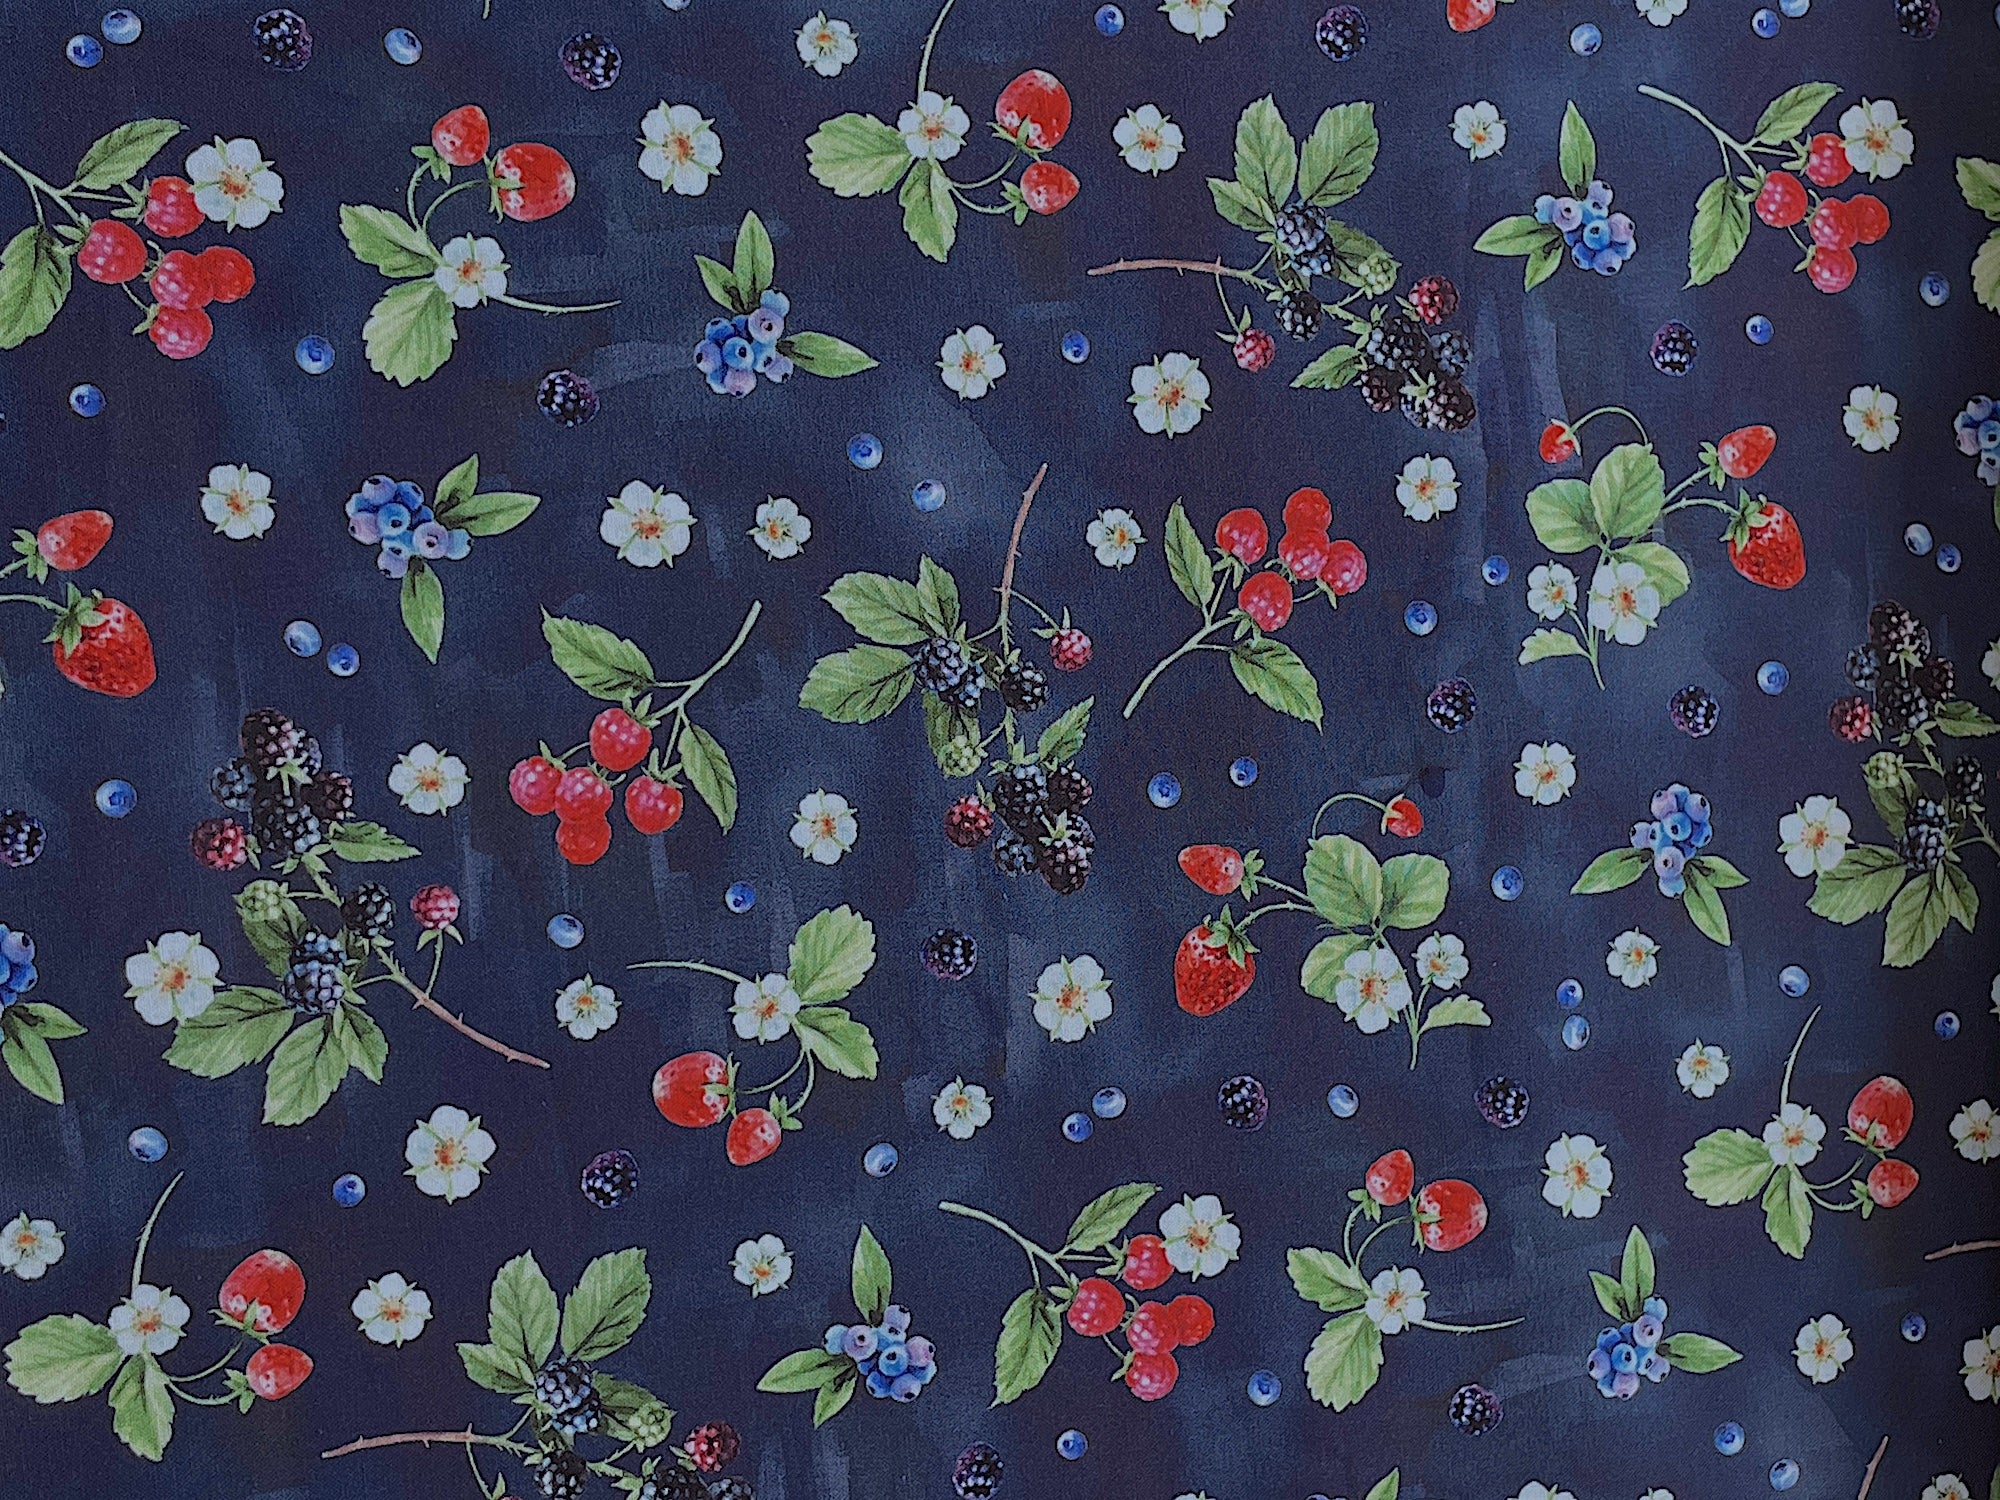 This royal blue fabric is covered with strawberries, raspberries, blackberries and blueberries.&nbsp; This fabric is part of the Dash of Love collection by Hoffman Fabrics.